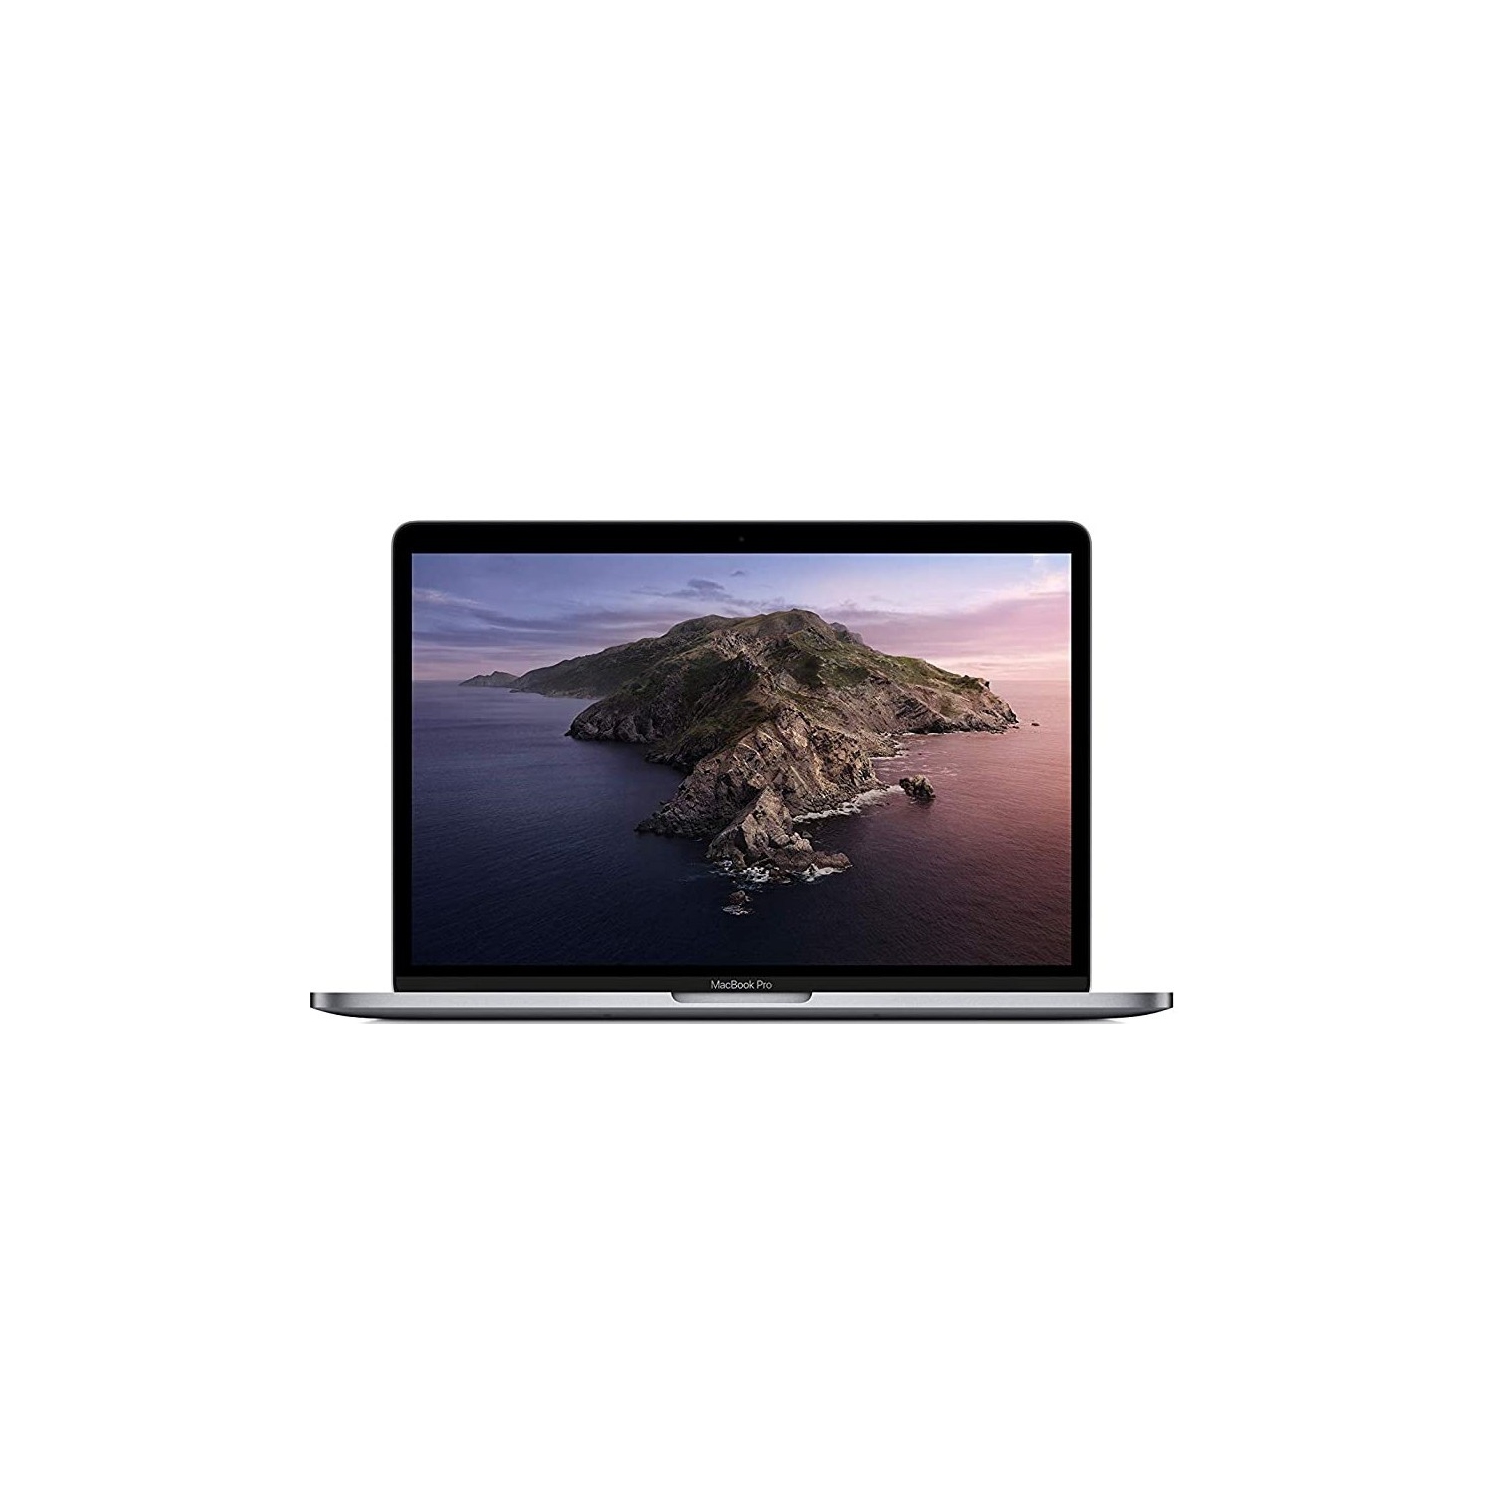 Refurbished (Excellent) Apple MacBook Pro 13.3" w/ Touch Bar (2019) - Intel Core i5, 8 GB RAM, 128GB SSD Grade A